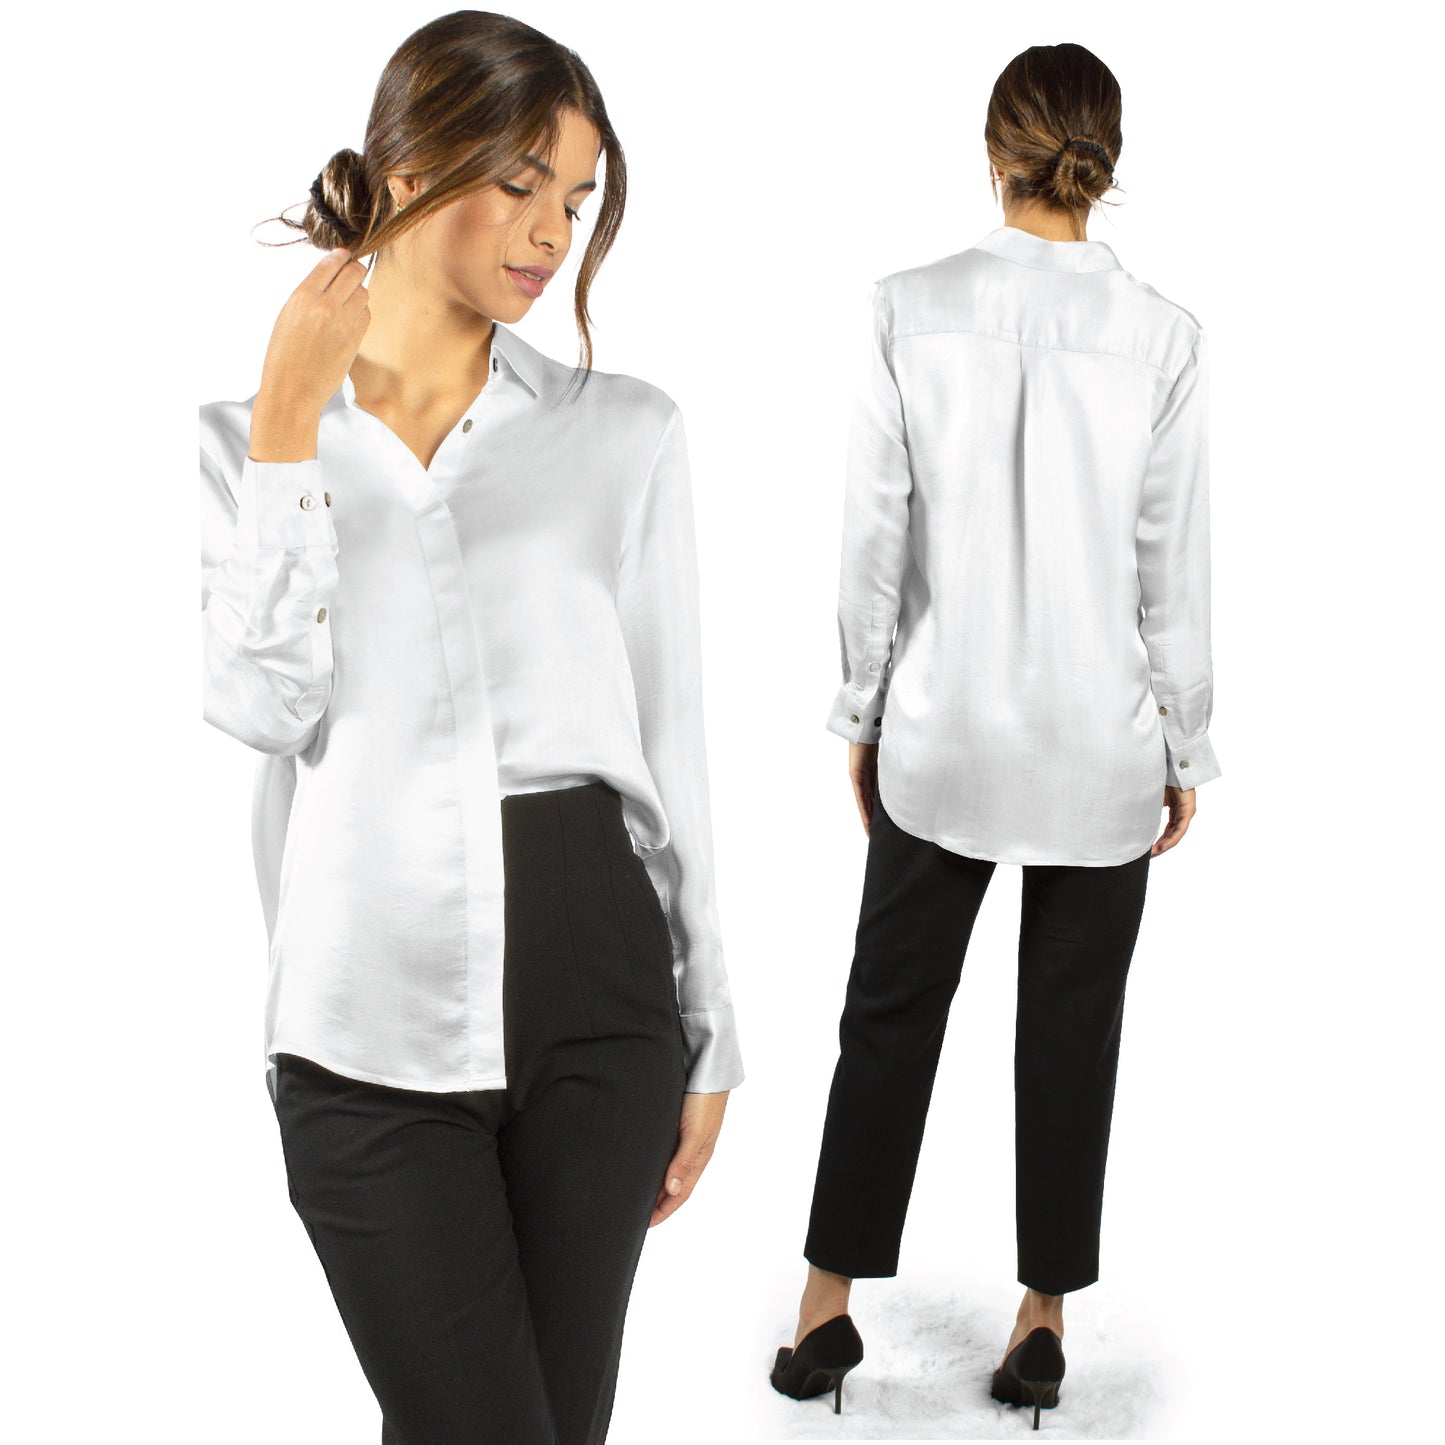 Luxury Artisan Silk Blouse for Women, Button Down Shirt, Washable Natural Mulberry Silk